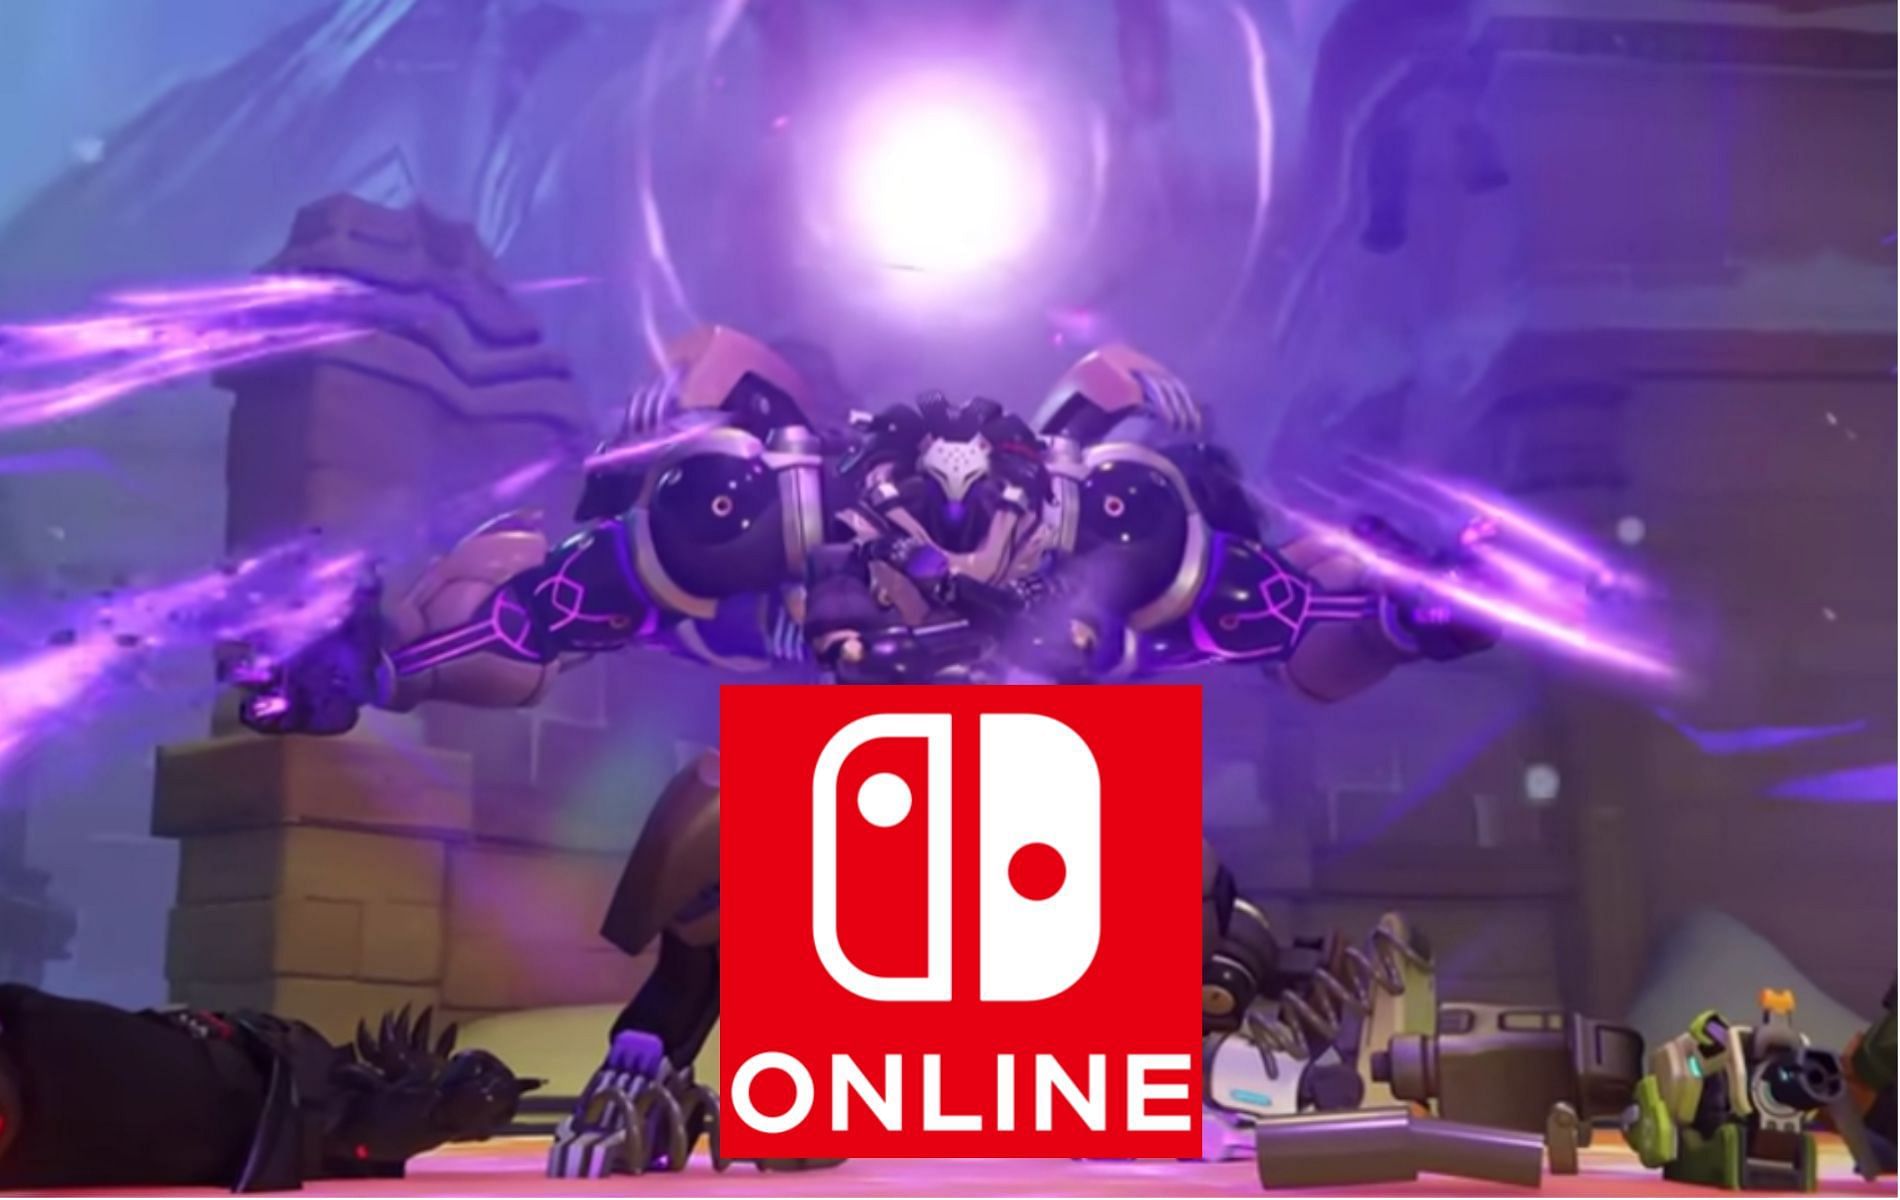 Do players require a Nintendo Switch Online subscription to play Overwatch 2? (Image via Nintendo / Blizzard)